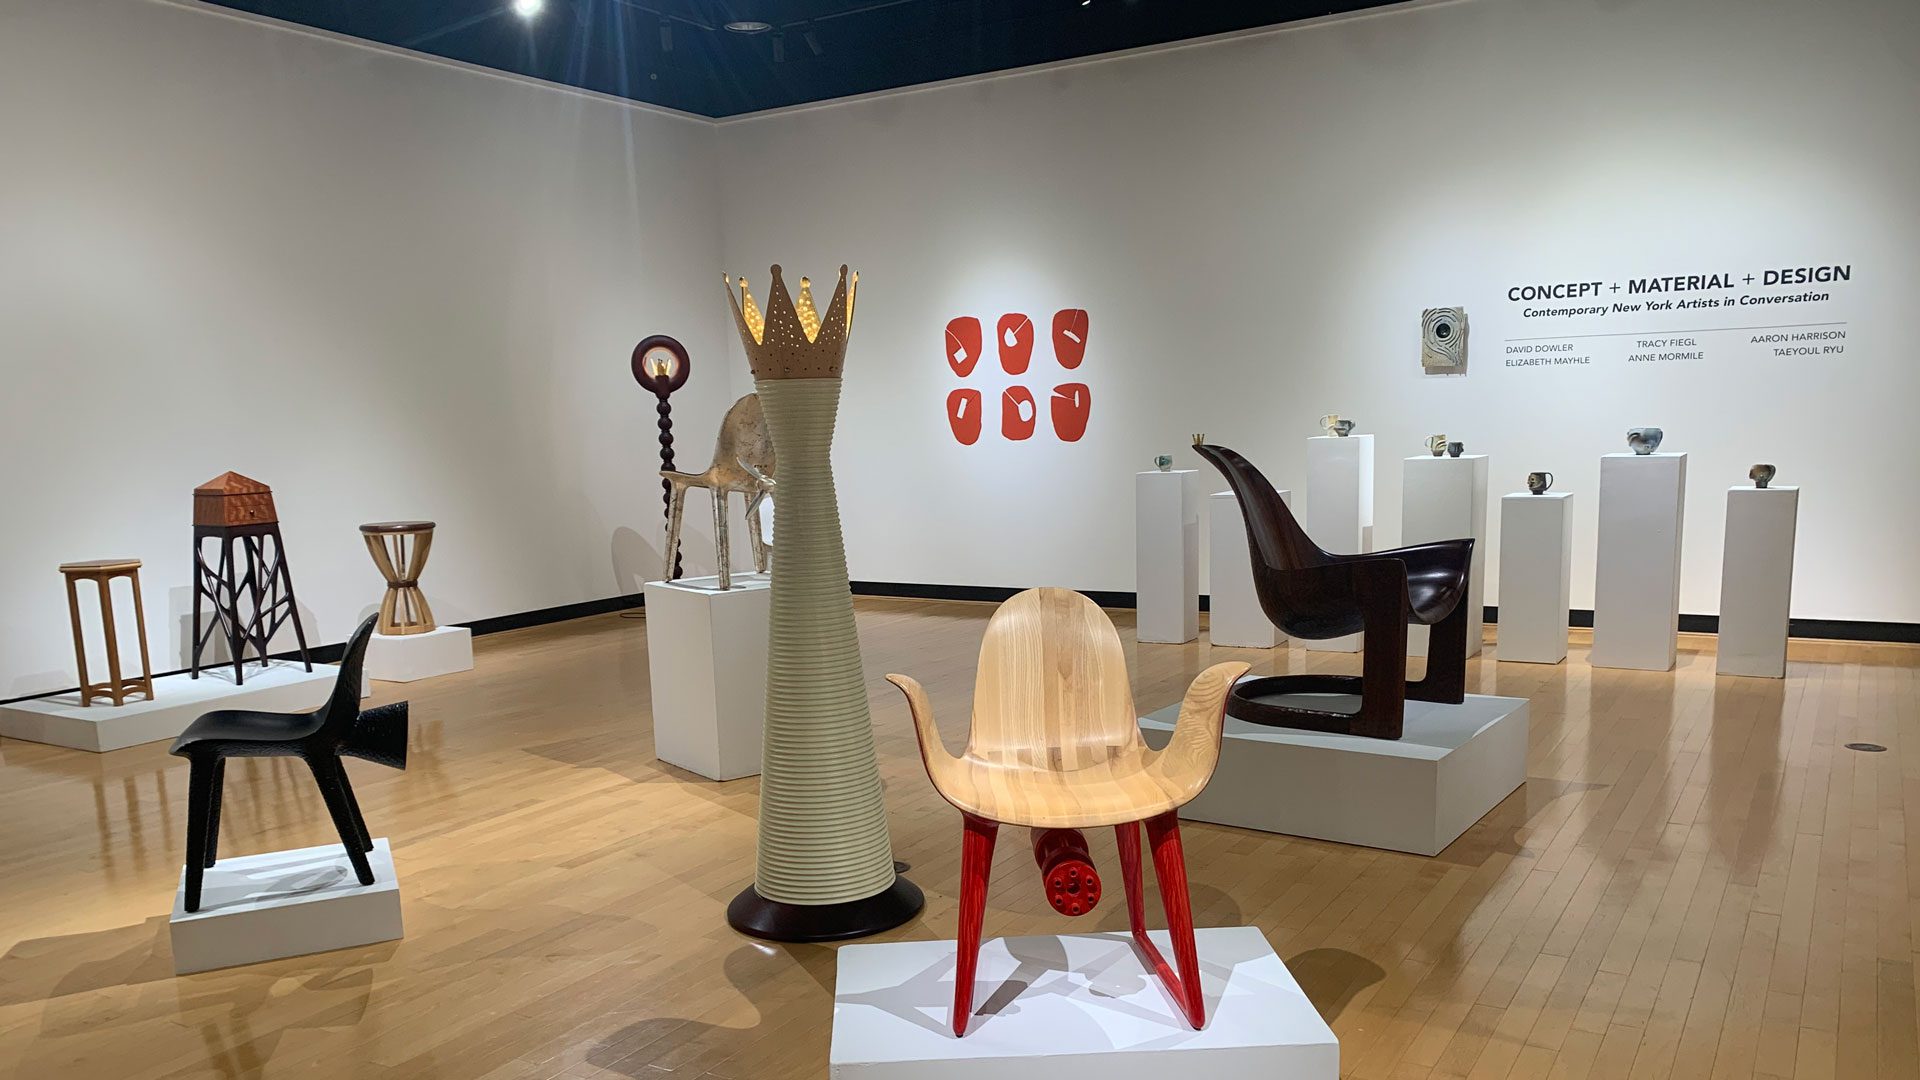 Concept, Material, & Design: Contemporary New York Artists in Conversation exhibit at Ortlip Gallery